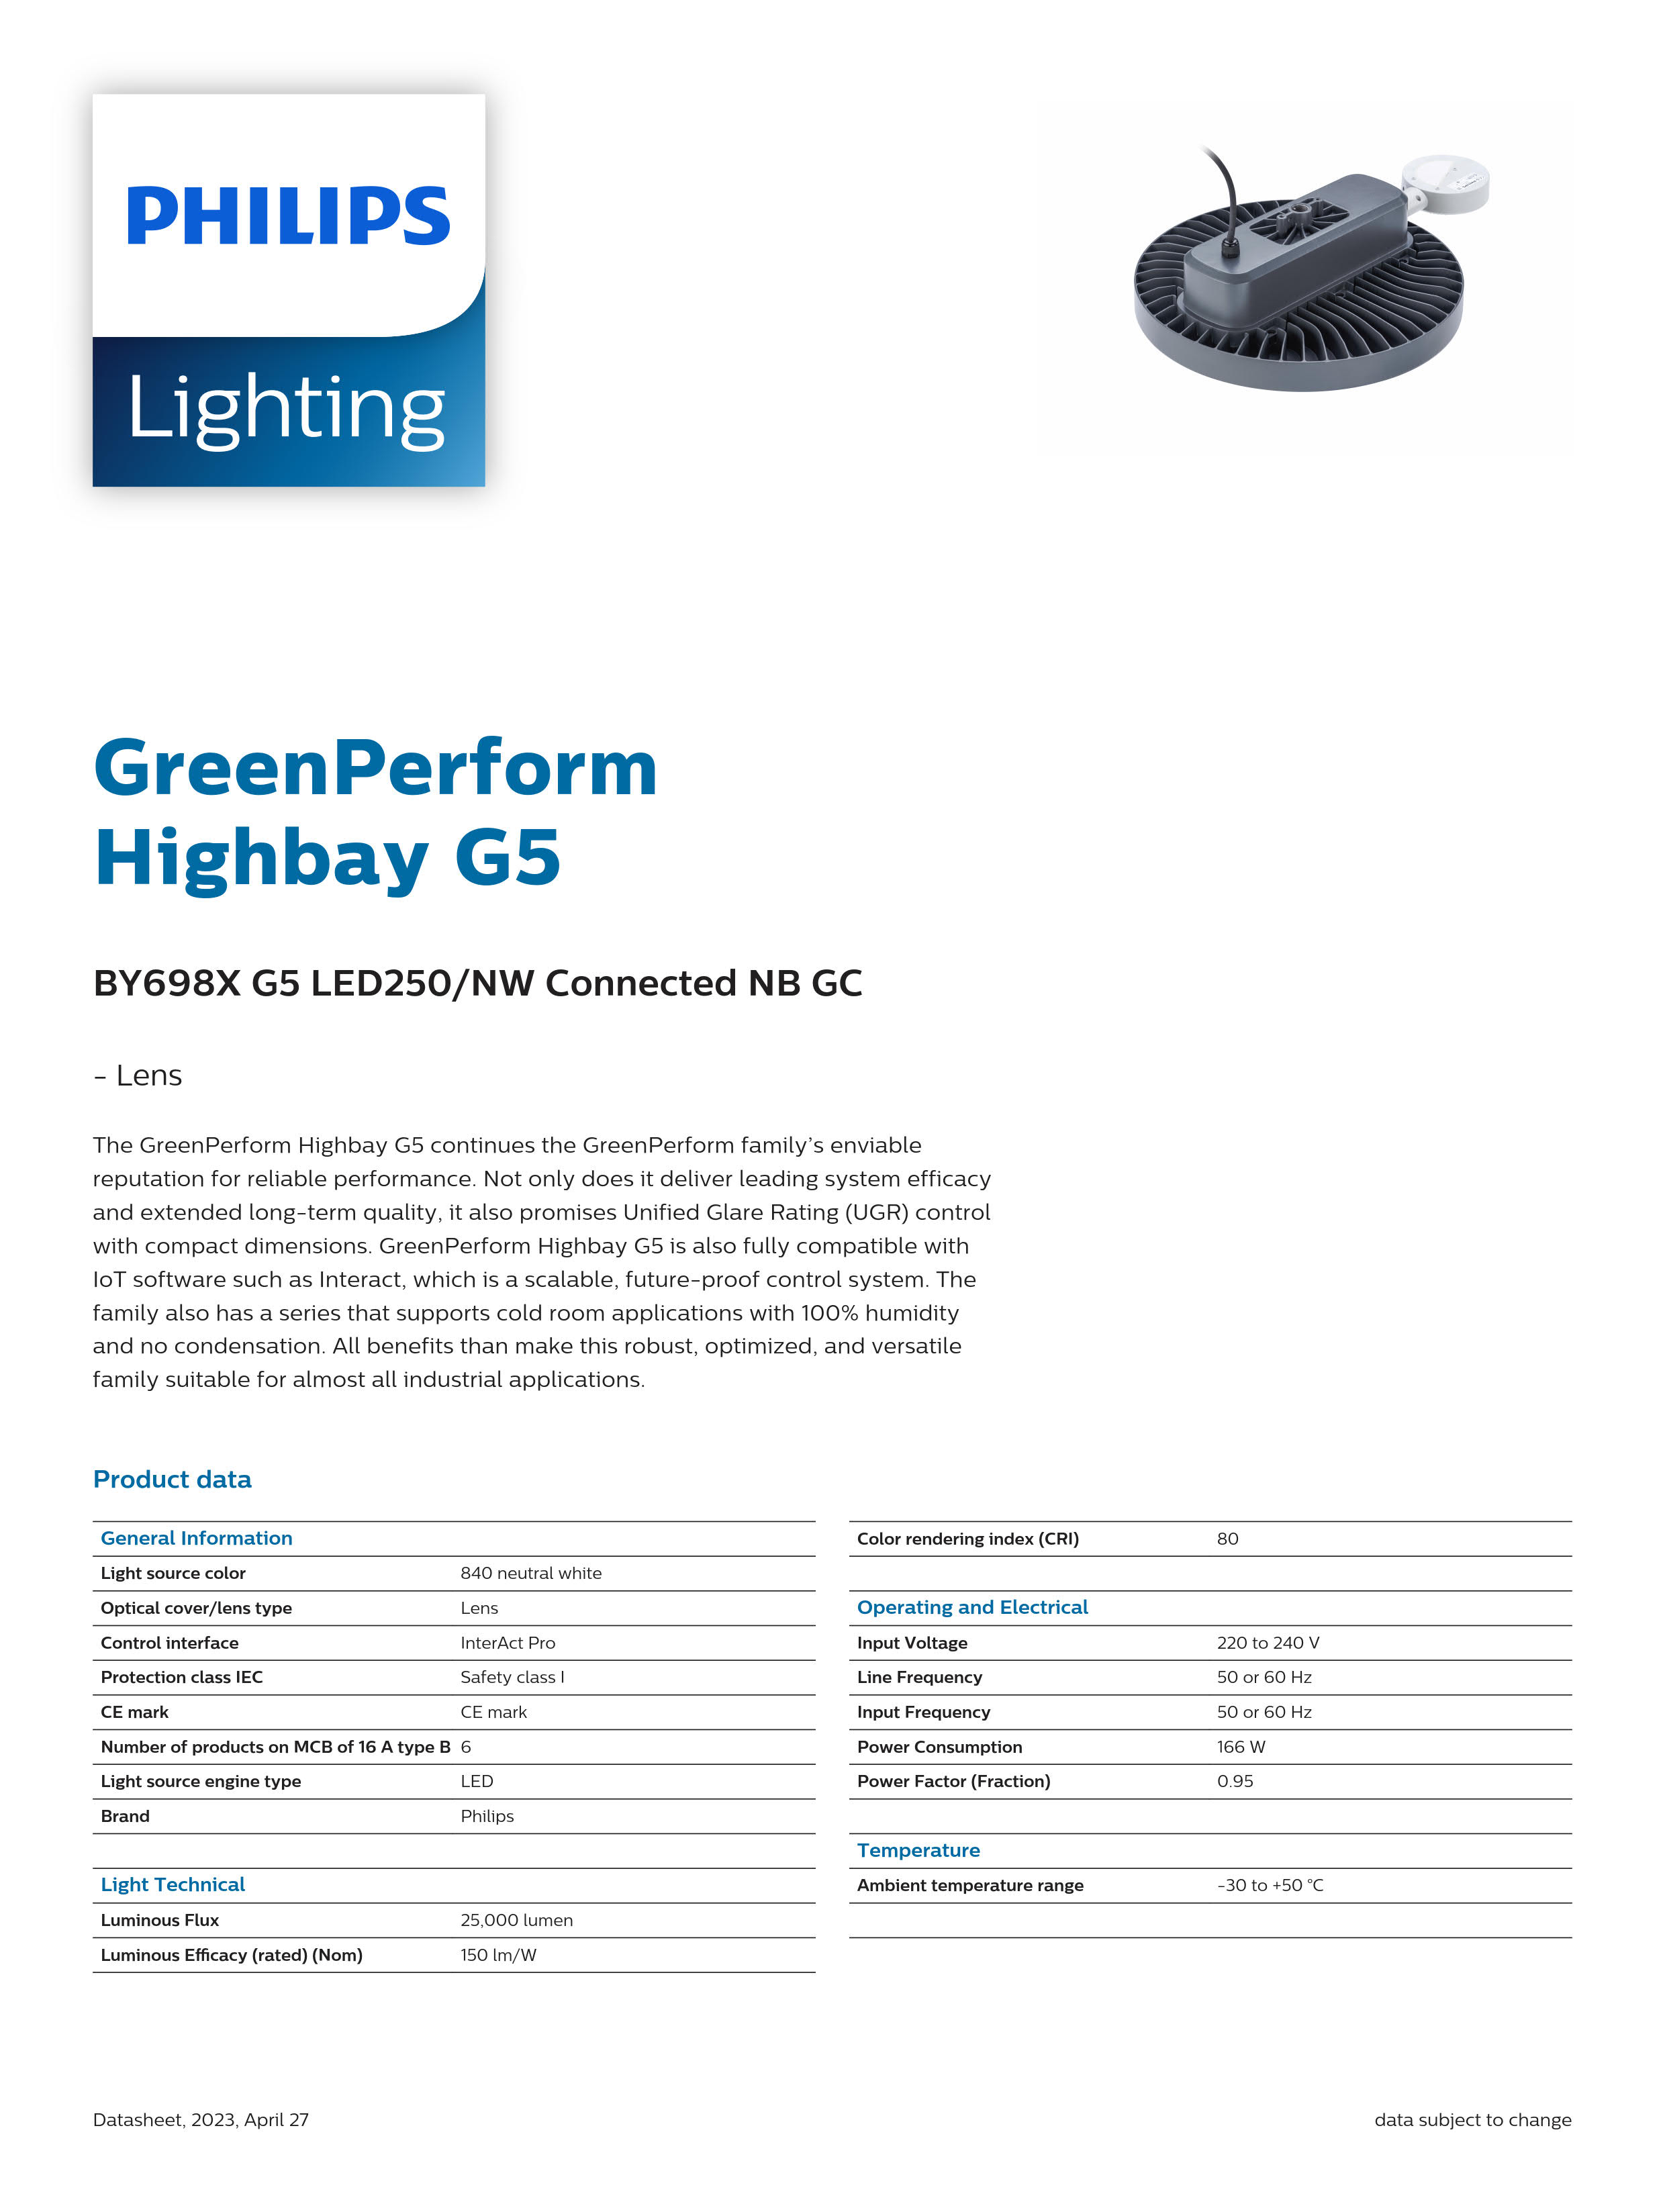 PHILIPS Highbay BY698X G5 LED250/NW Connected NB GC 911401524891